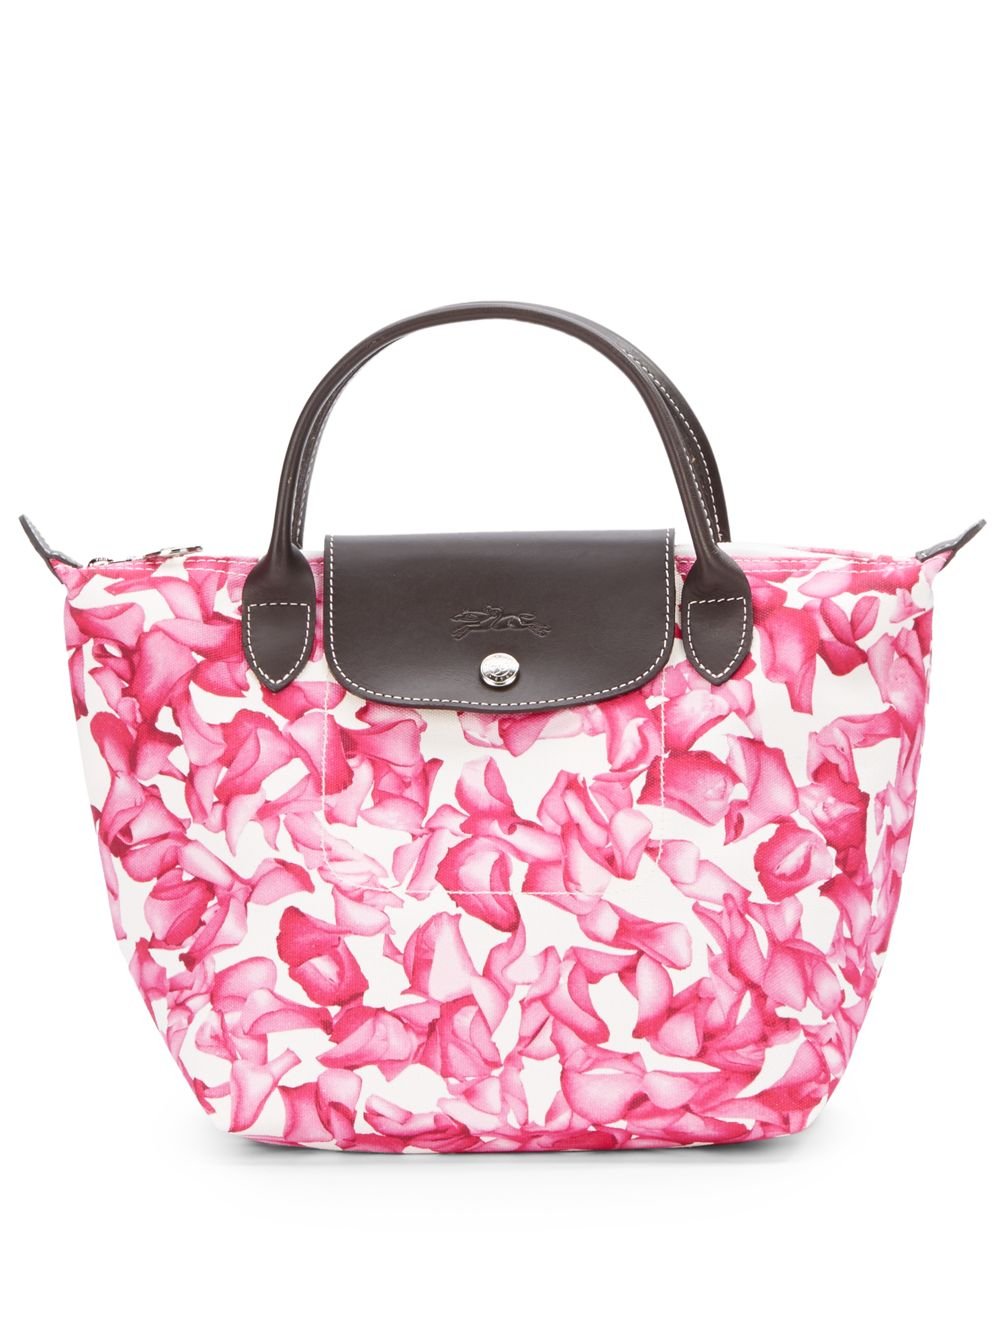 Longchamp Darshan Floral Small Tote Bag in Pink | Lyst